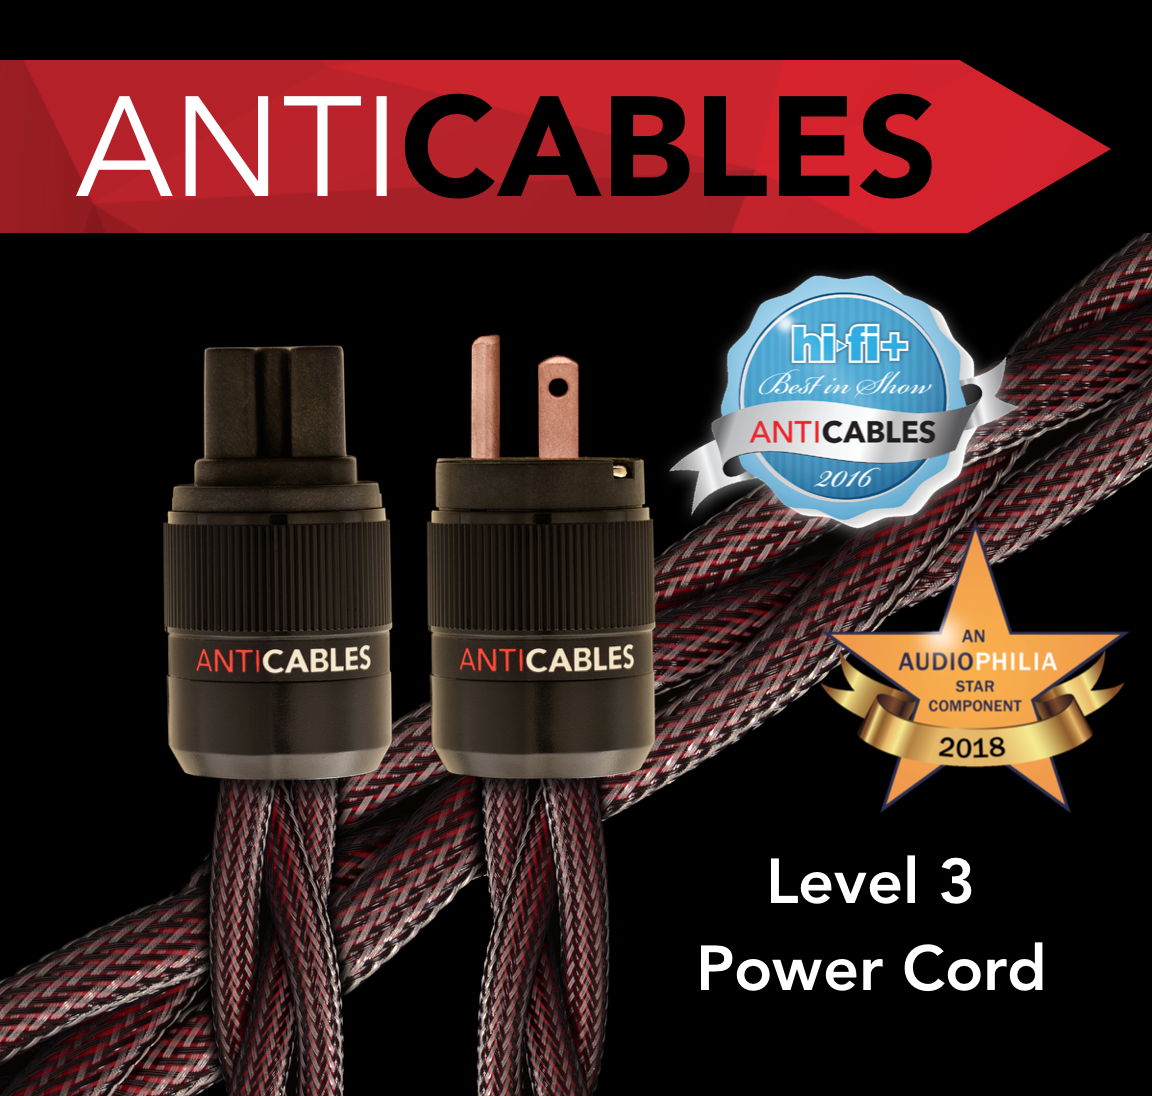 ANTICABLES Level 3 Power Cord  11 ft